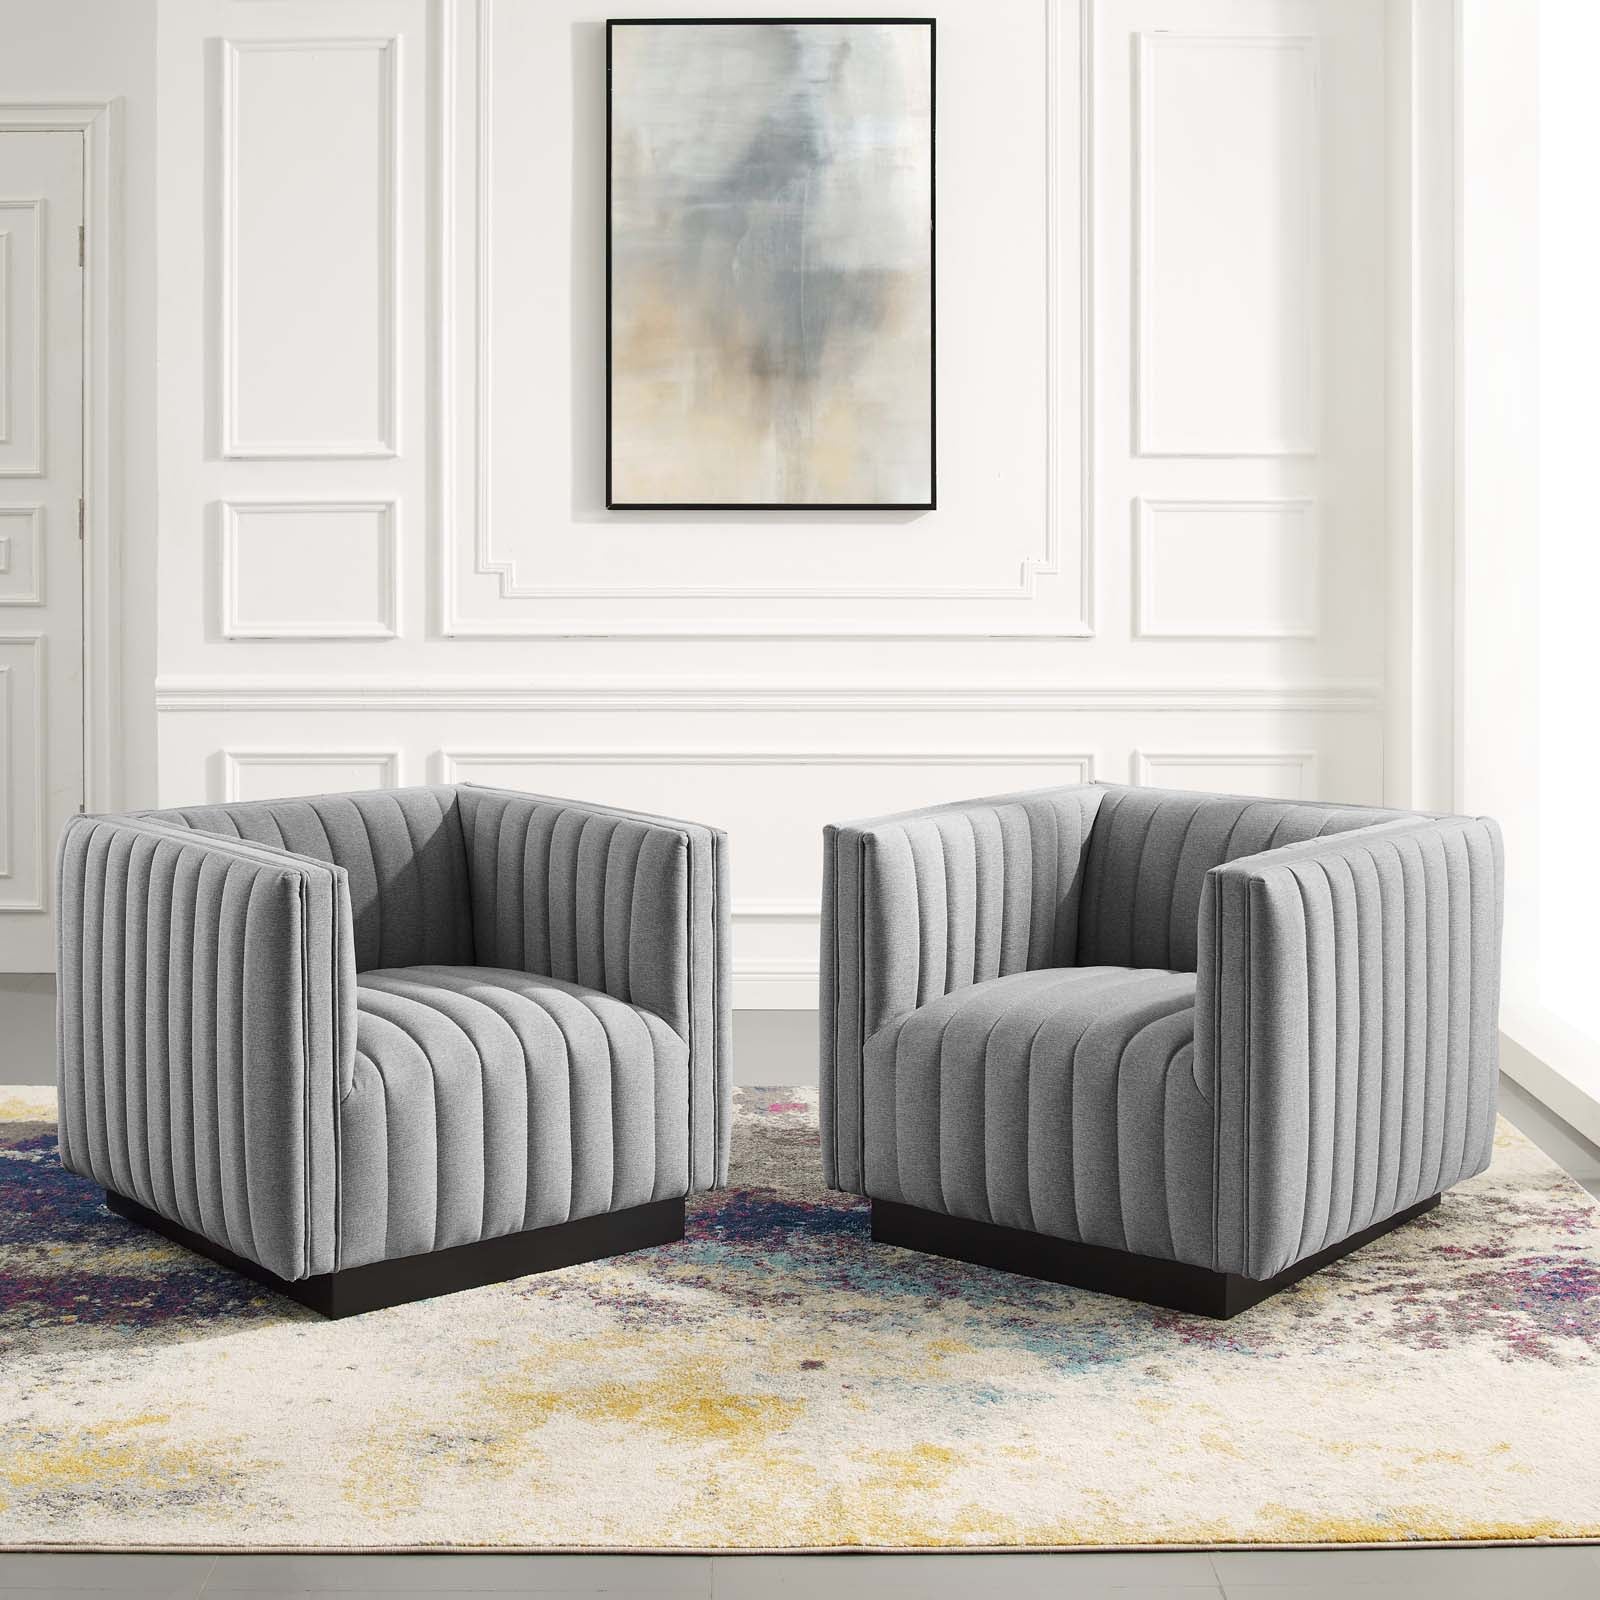 Modway Living Room Sets - Conjure Tufted Armchair Upholstered Fabric ( Set of 2 ) Light Gray